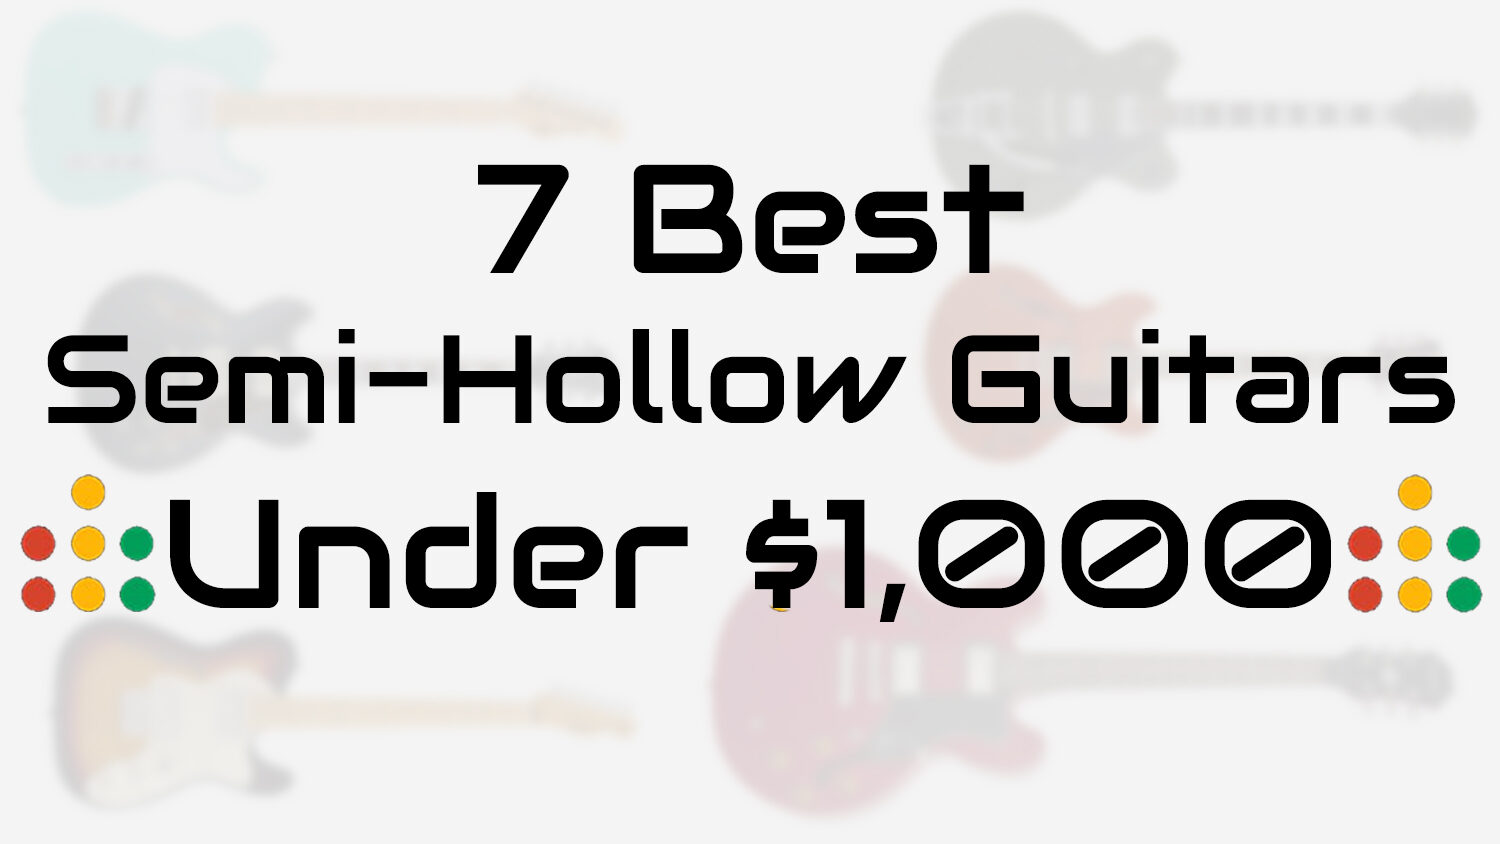 7 of the best semi-hollow guitars under $1000